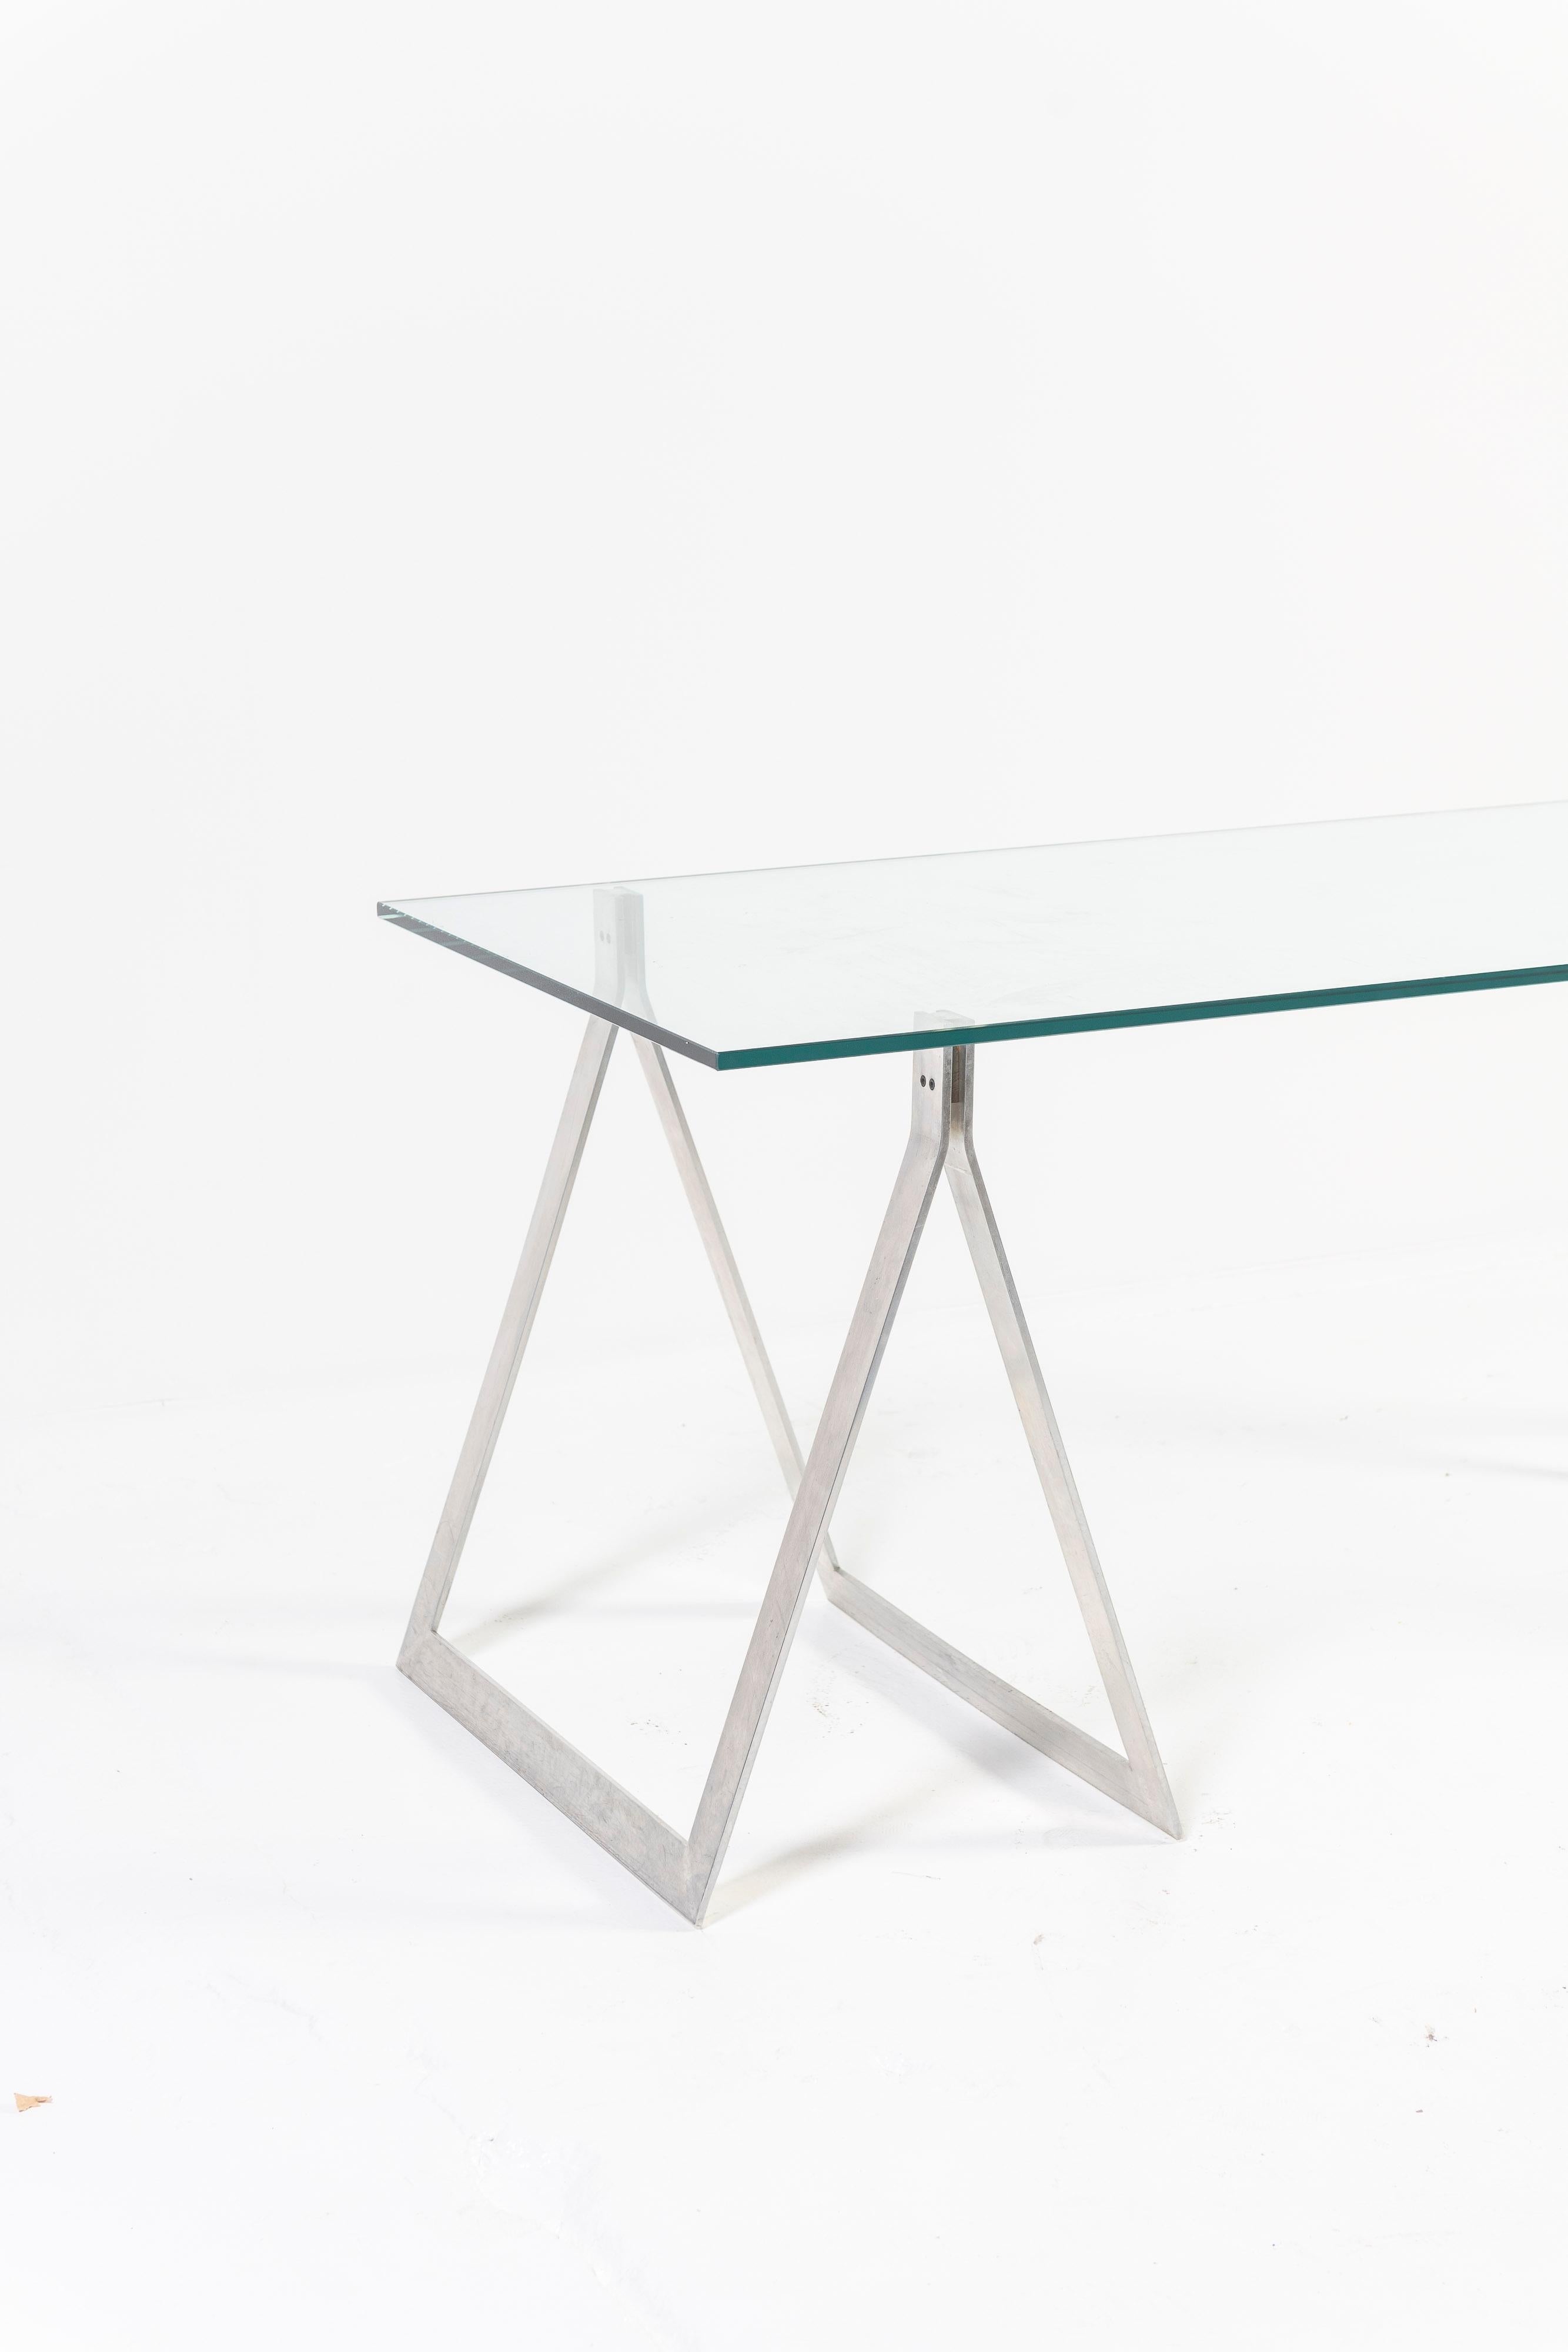 20th Century Mid-Century Modern Saw Horse Desk with Steel Base and Rectangular Glass Top For Sale